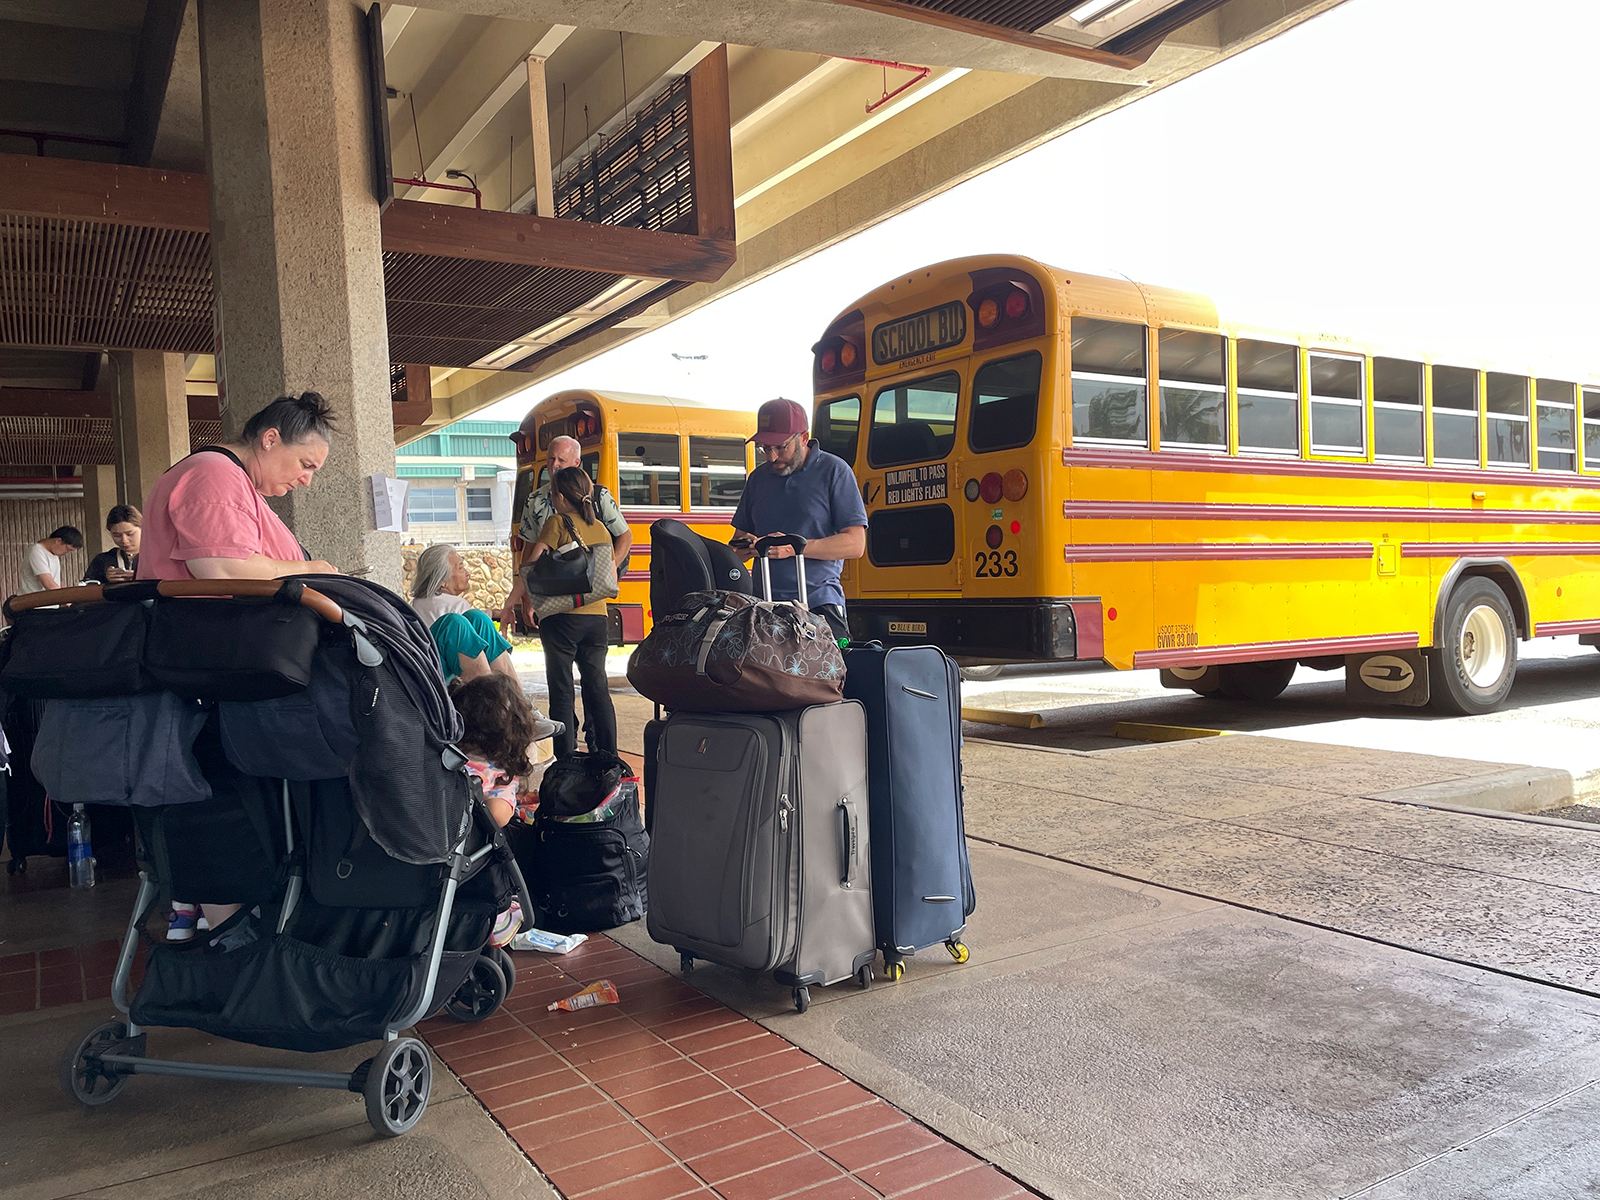 School buses used as emergency shuttles are seen at the Maui airport in Kahului, Hawaii, on August 10.